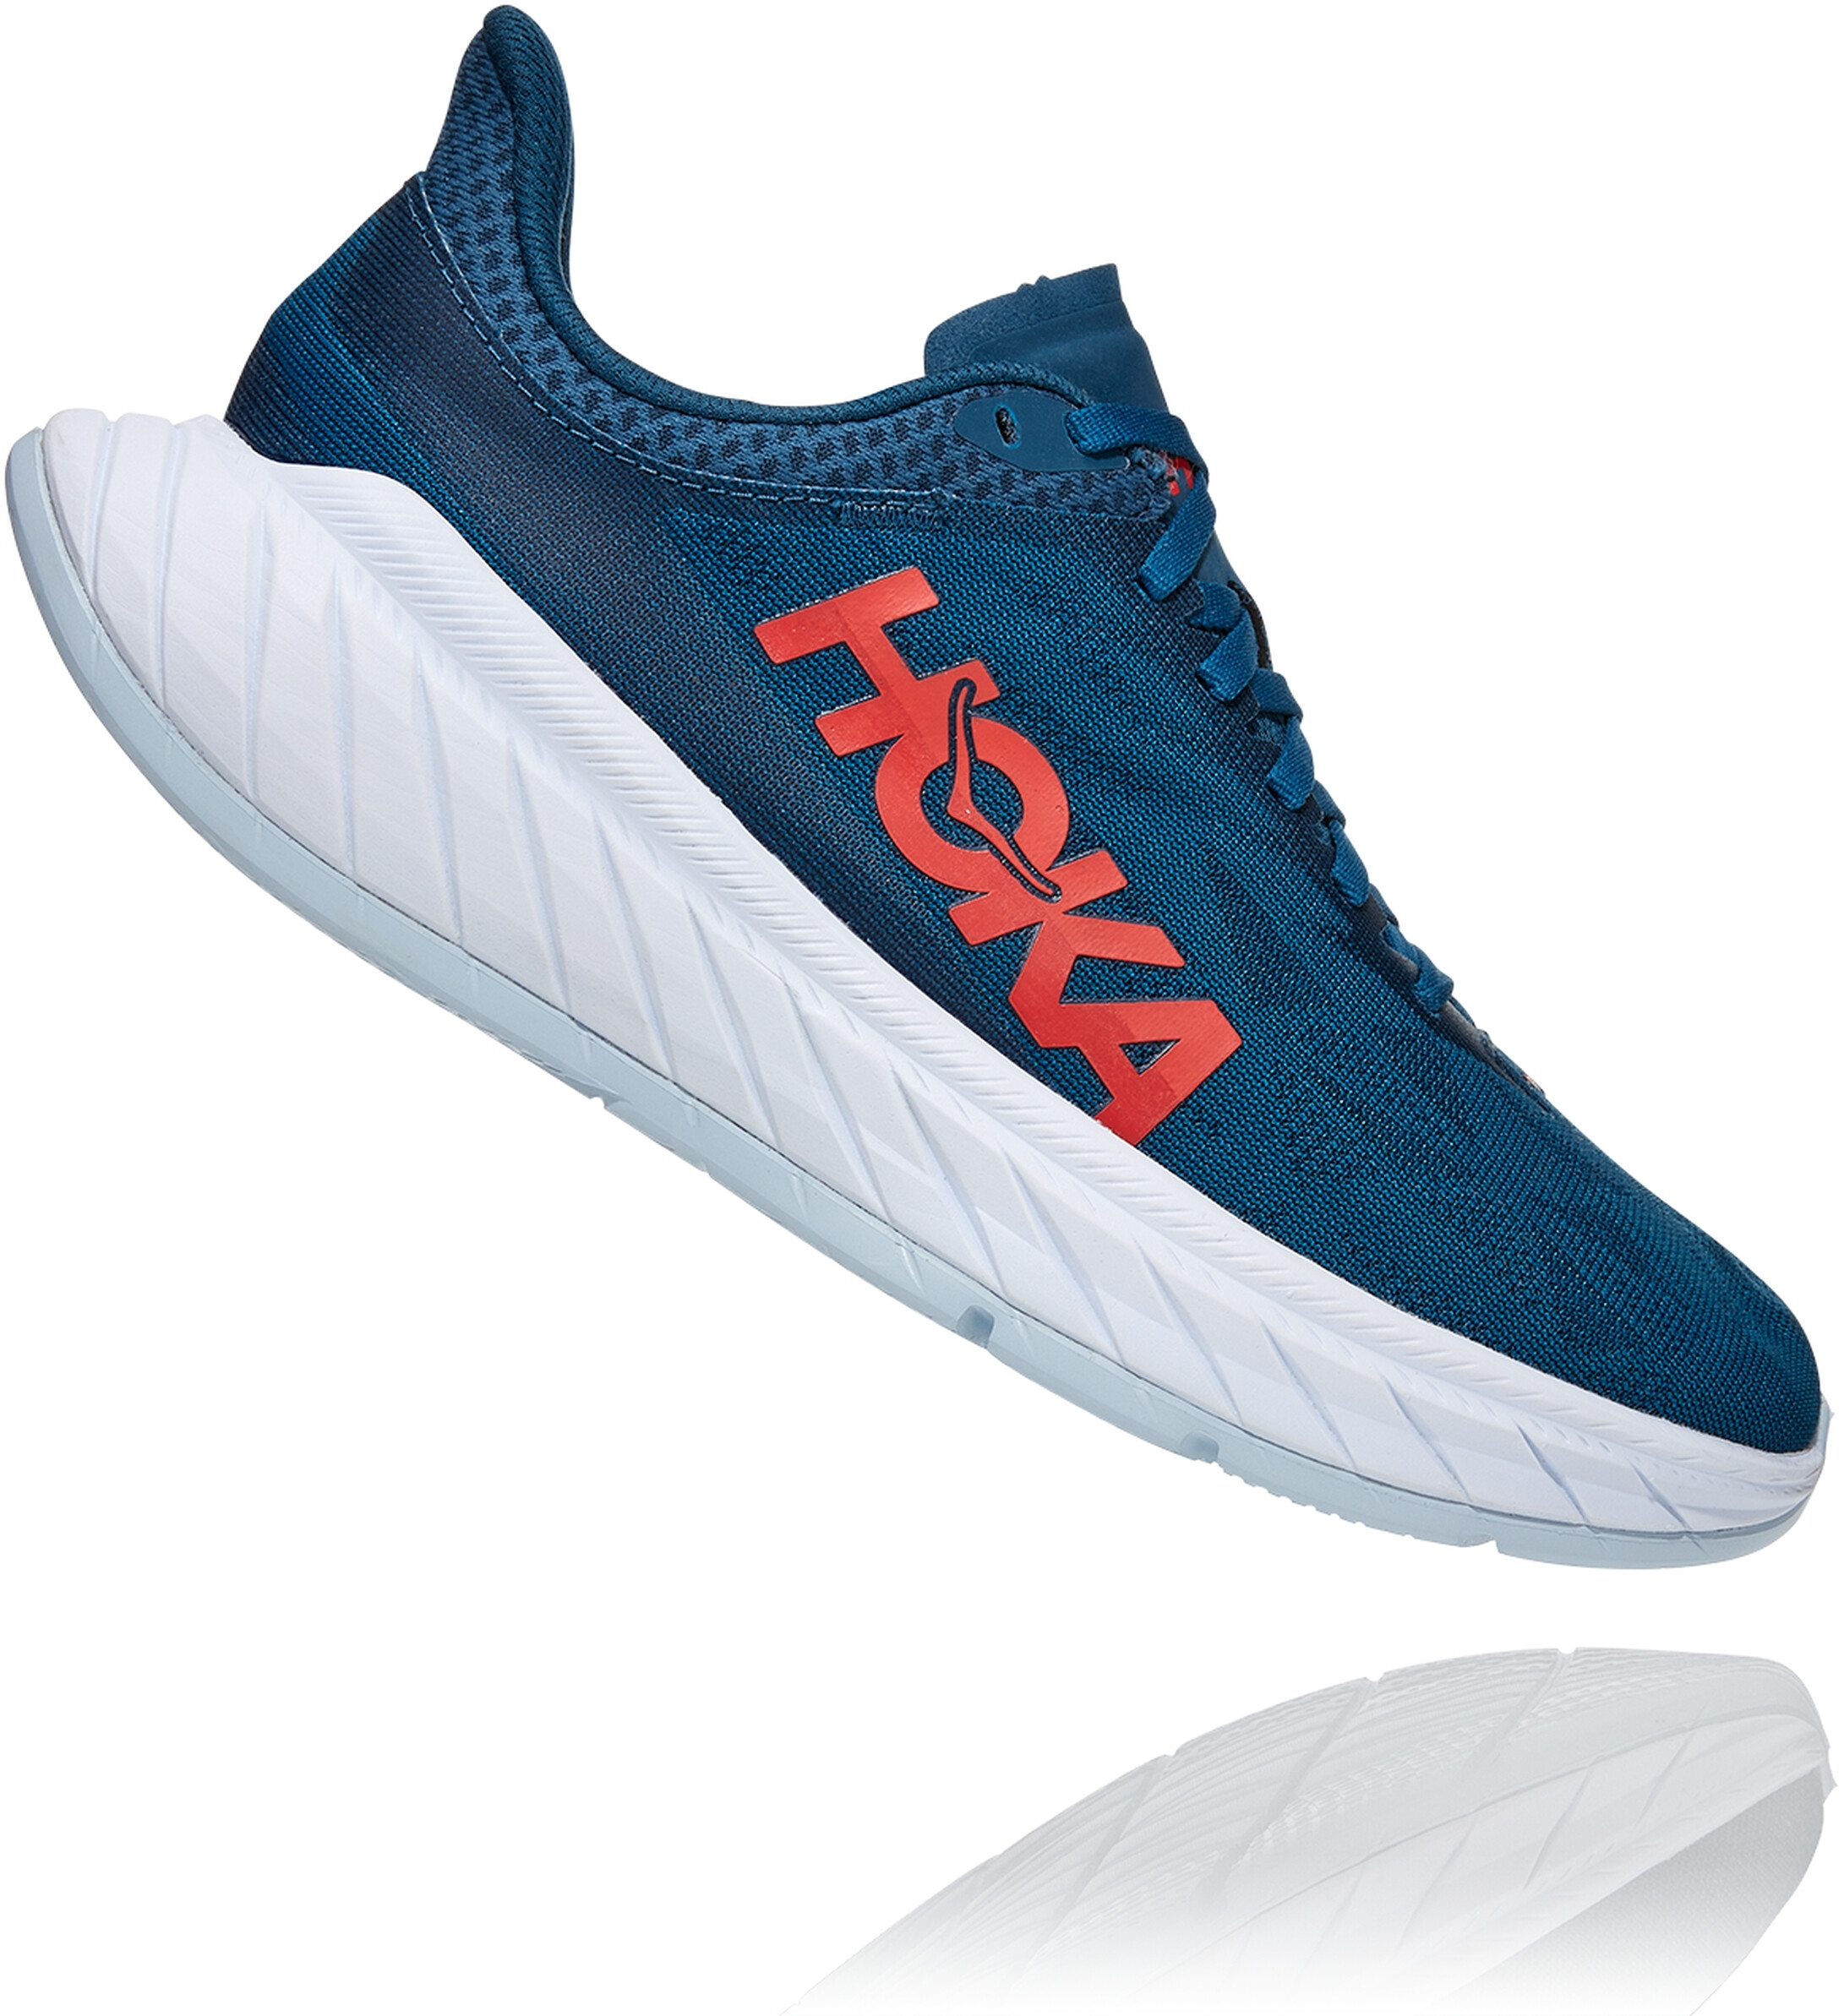 Hoka One One Carbon X 2 Shoes Women moroccan blue/hot coral | Bikester ...